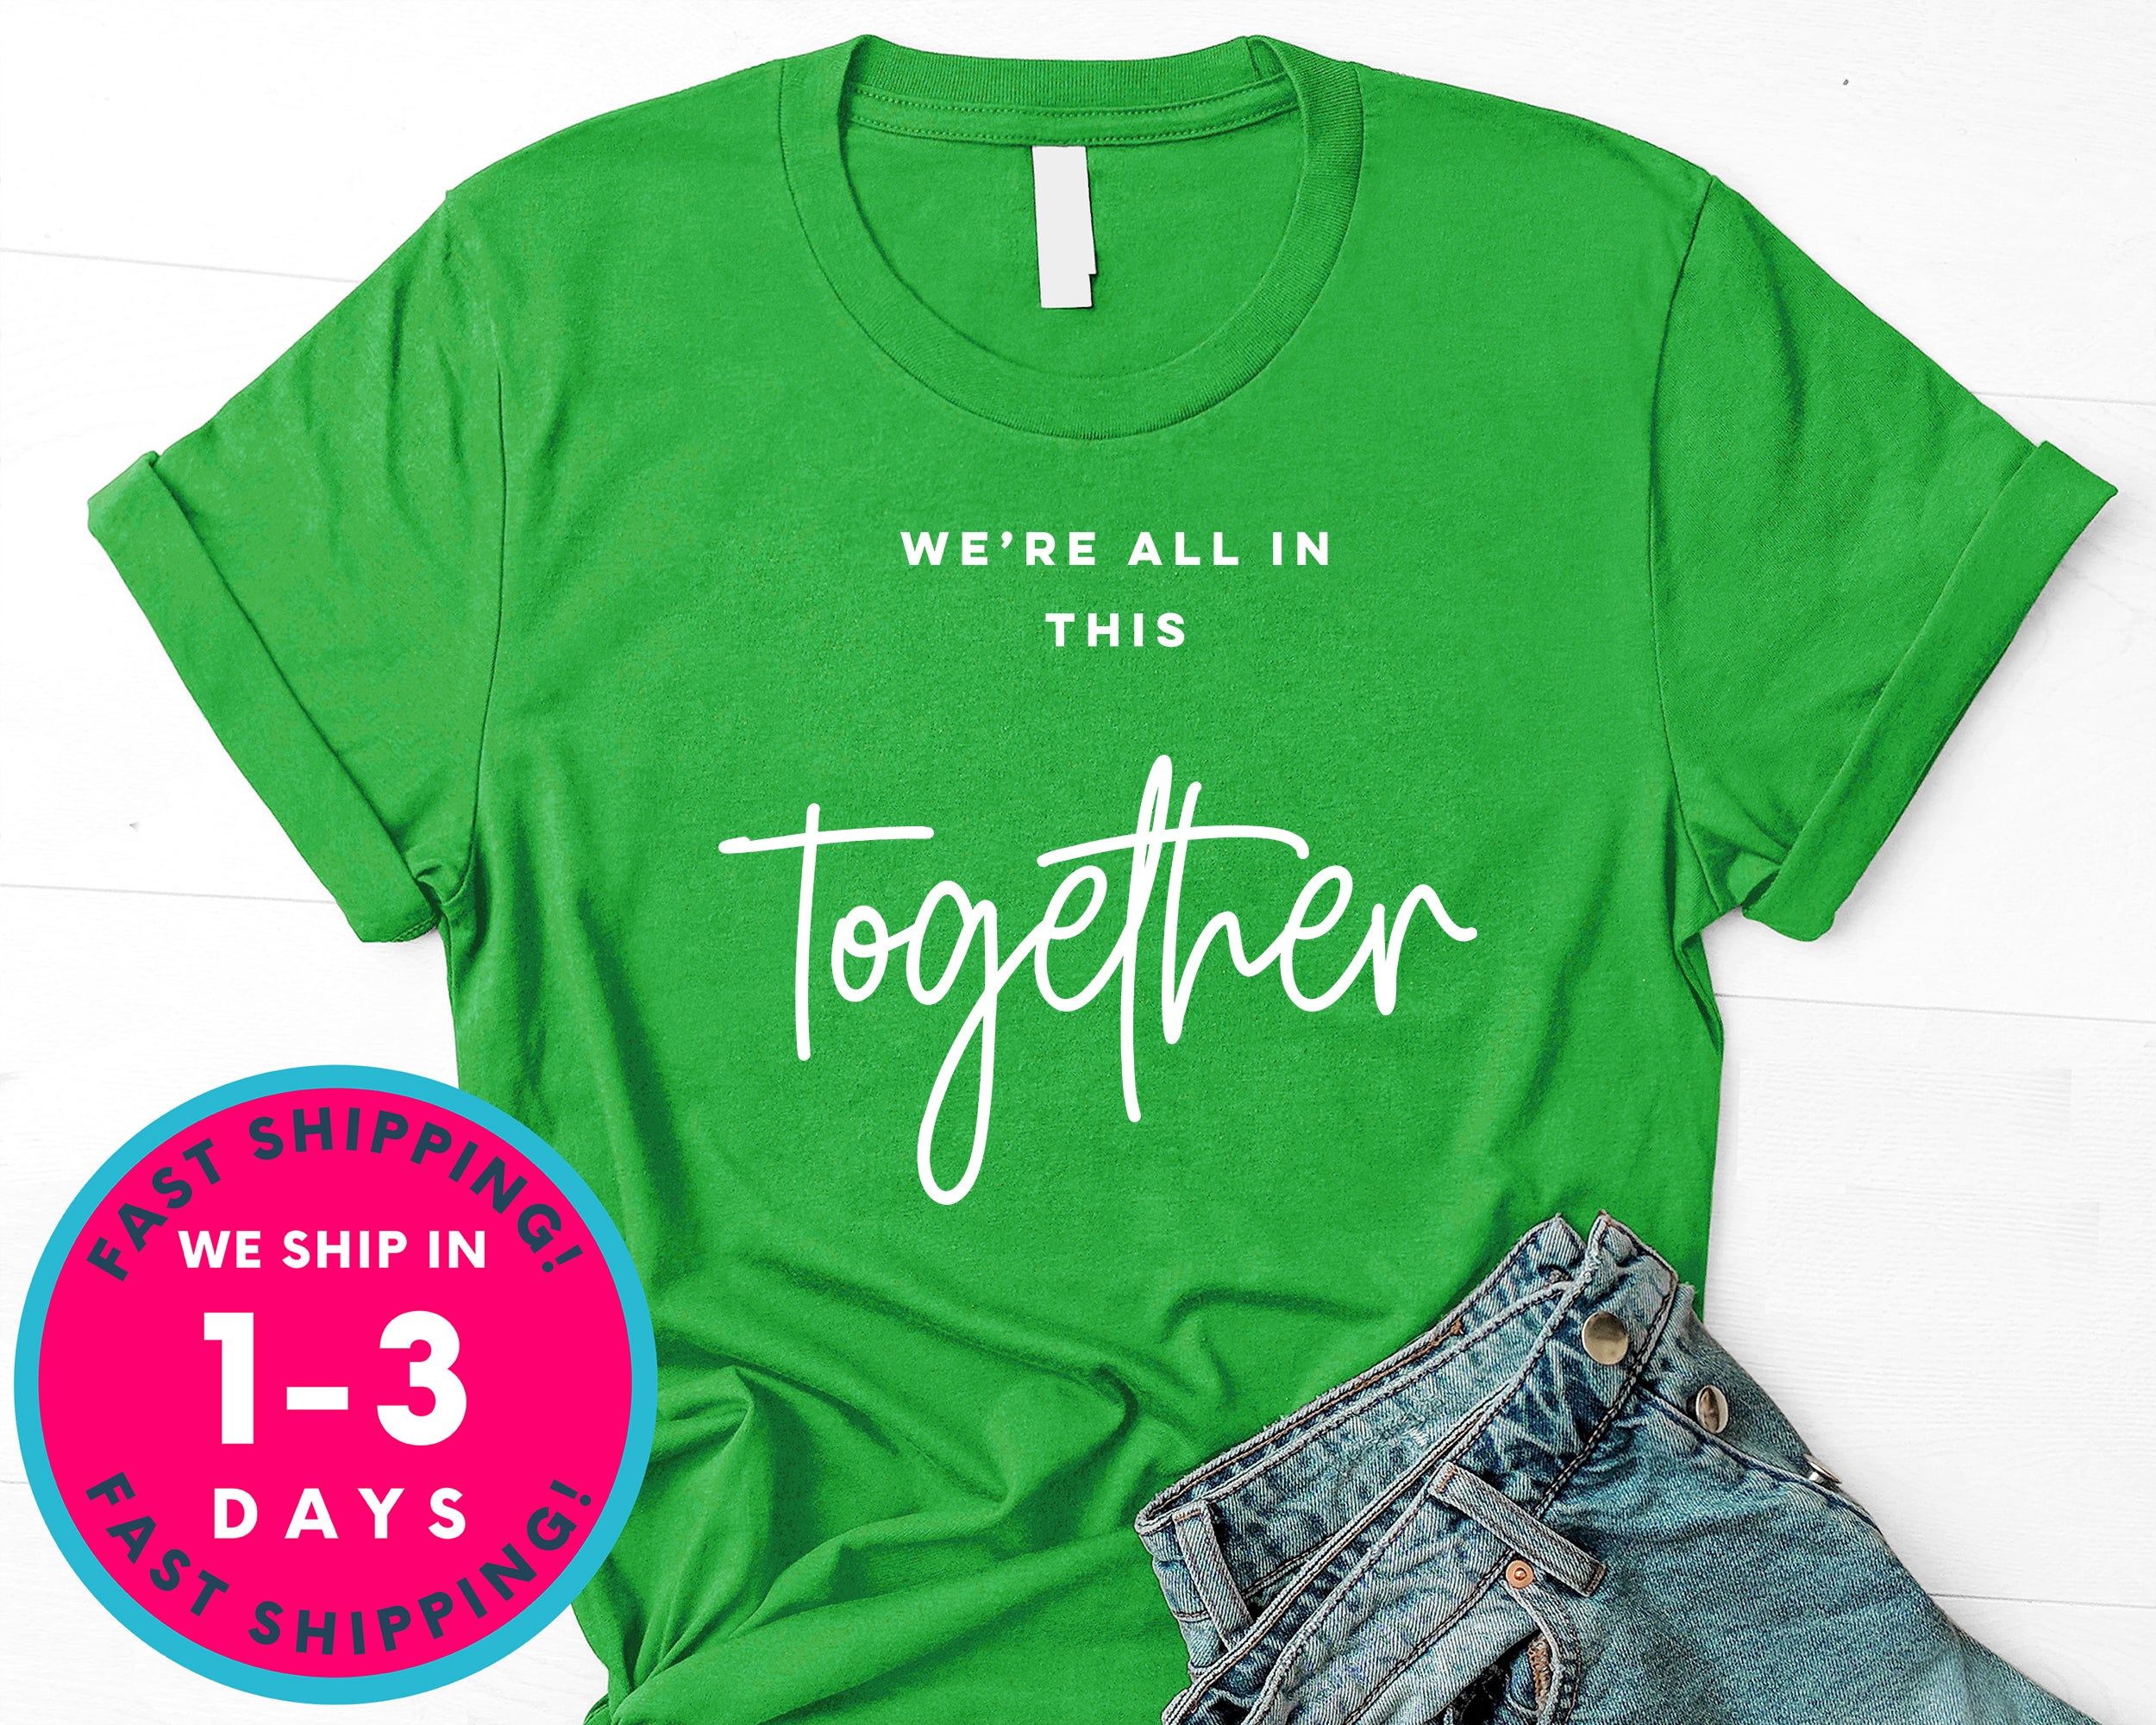 We're All In This Together T-Shirt - Inspirational Quotes Saying Shirt